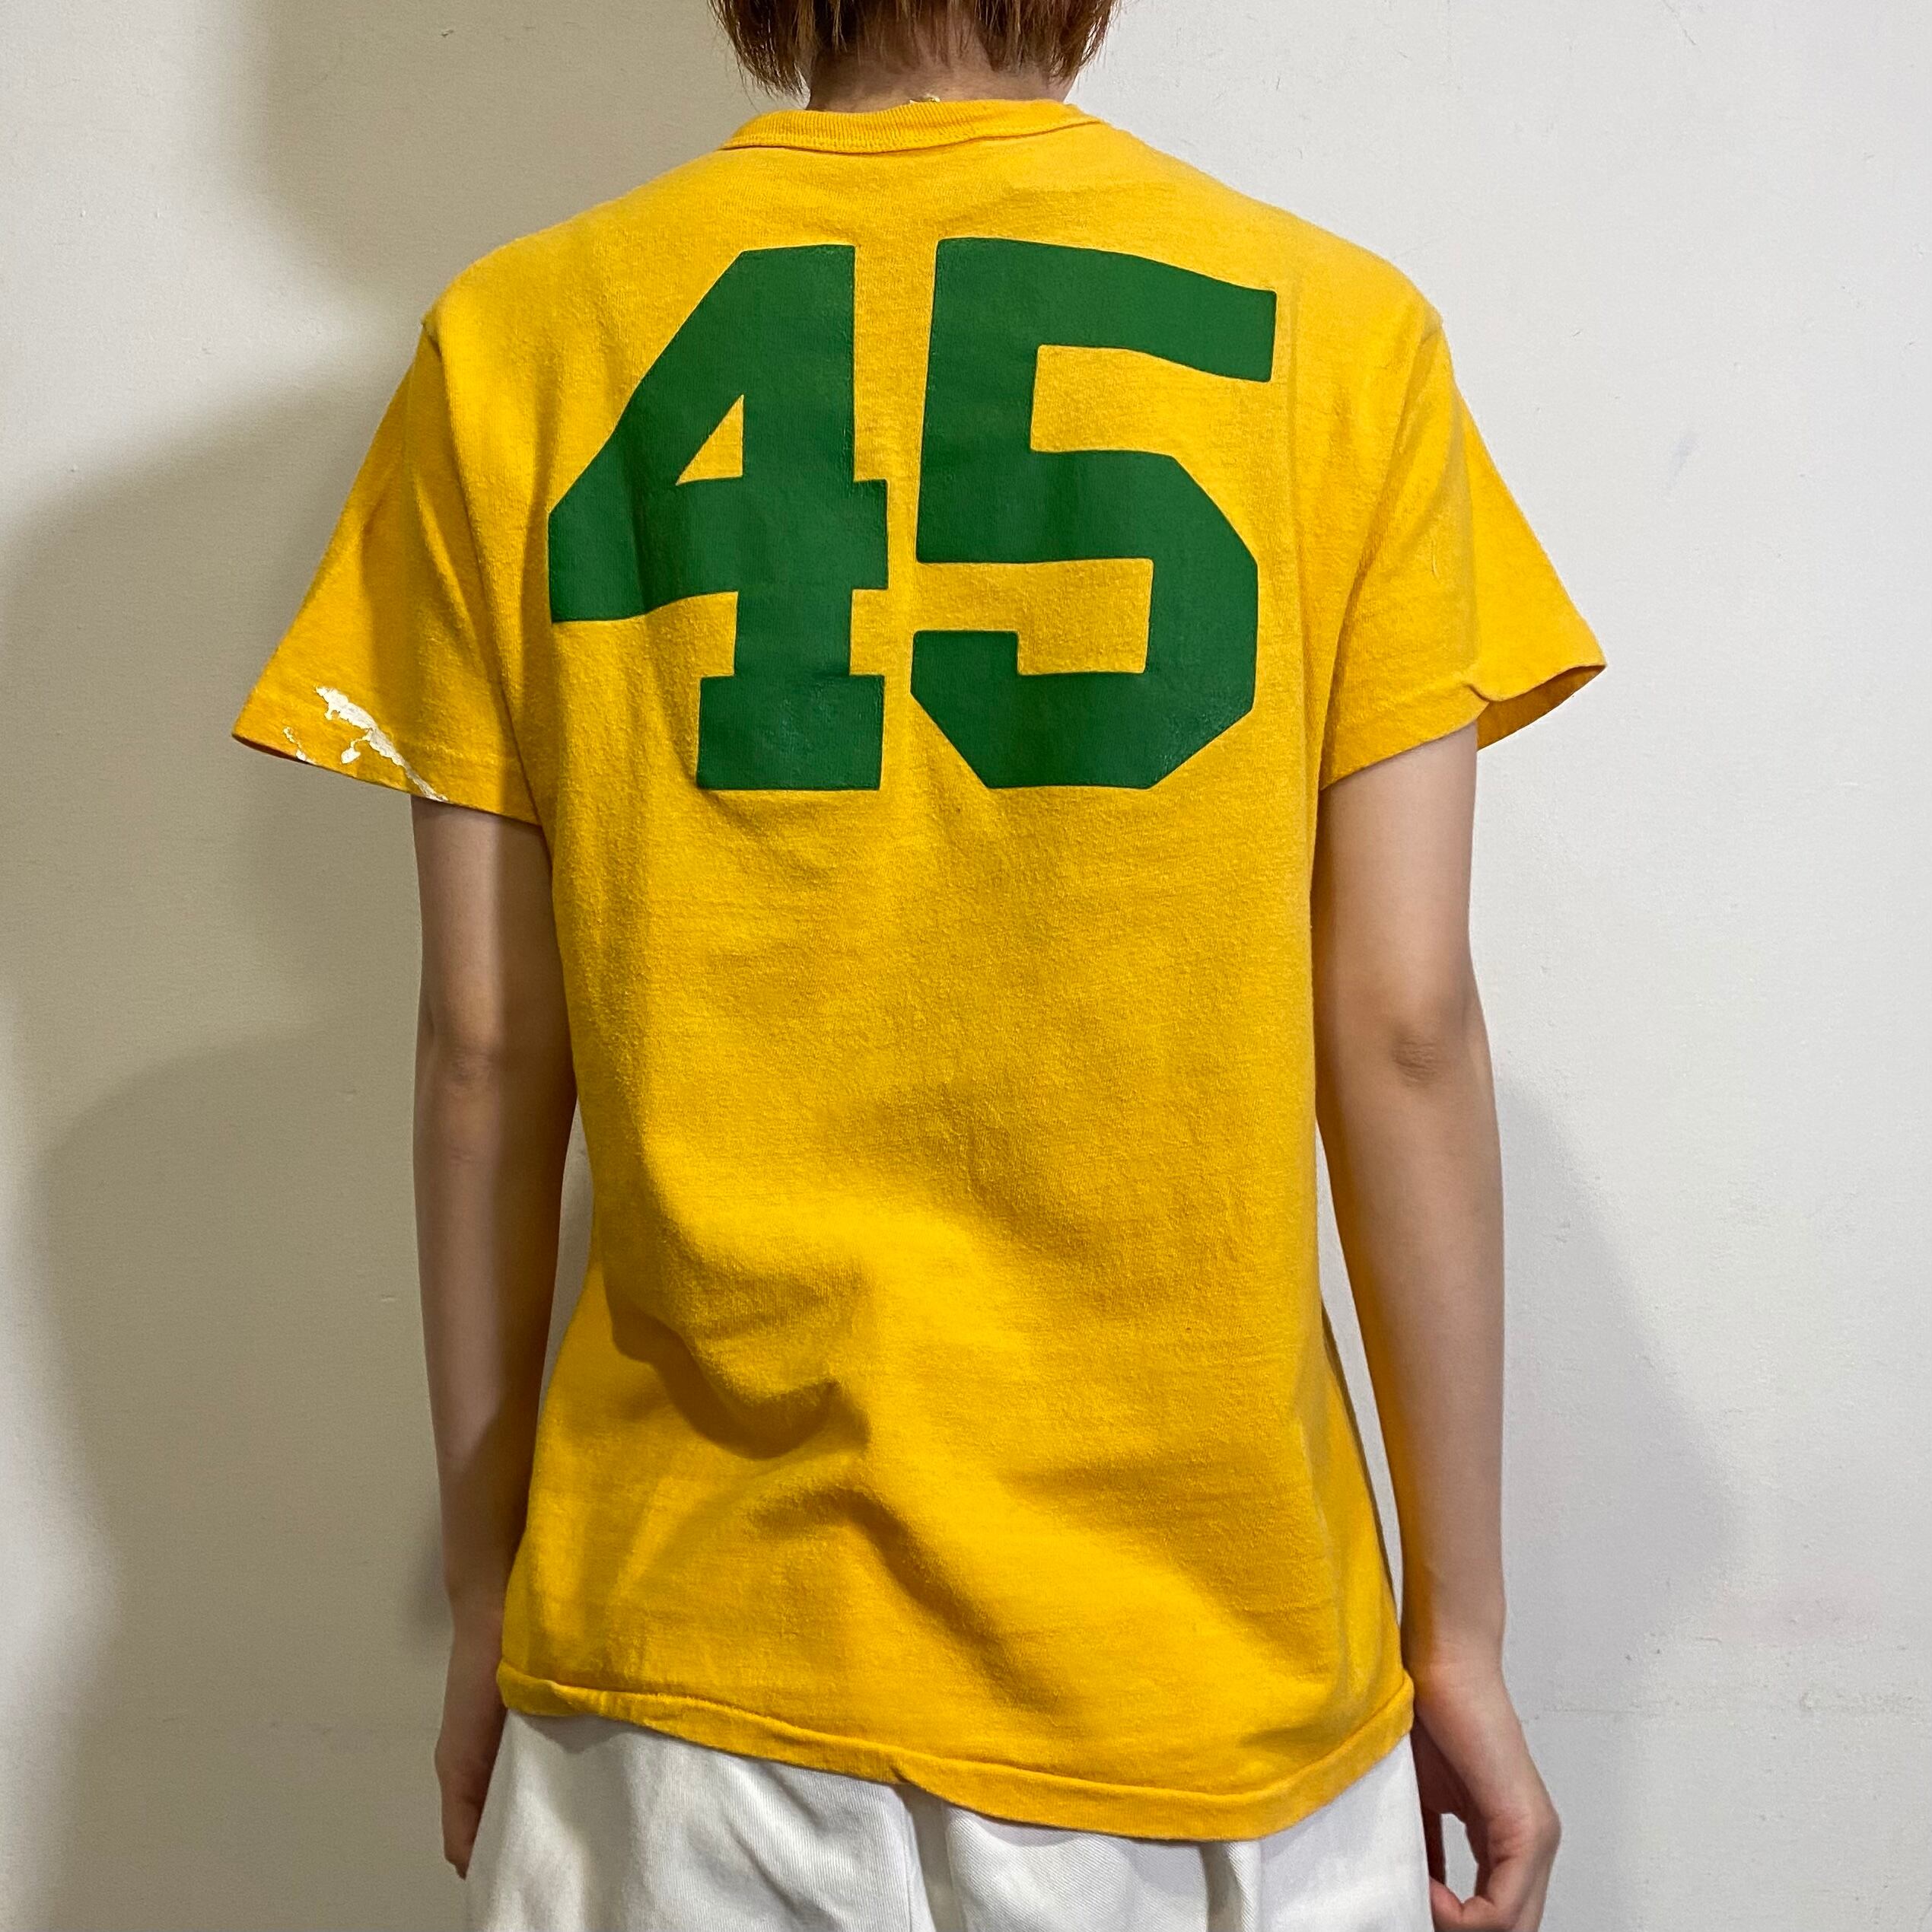 70s yellow and green numbering tee | LEMON powered by BASE